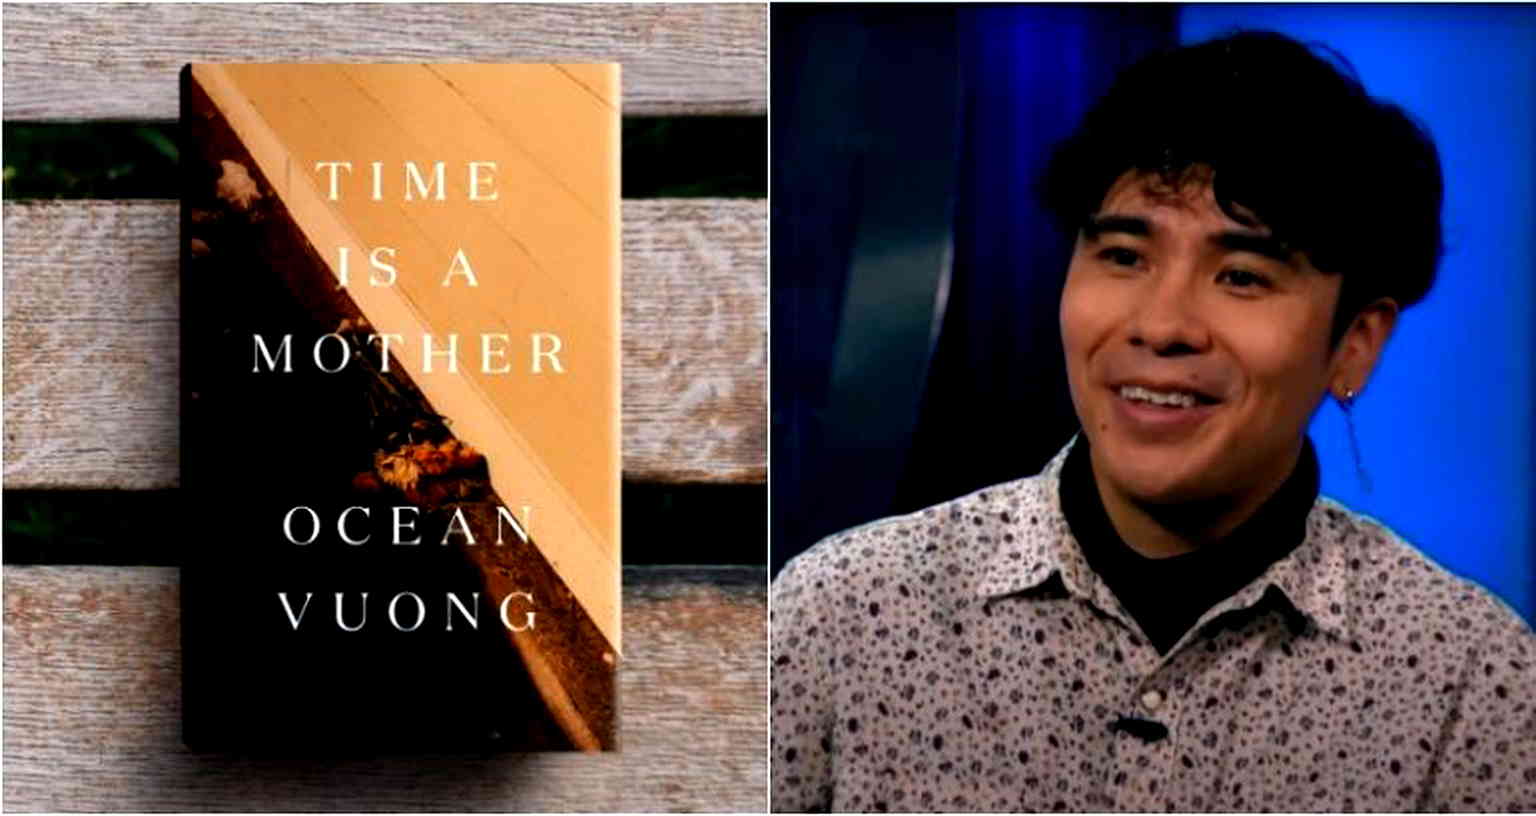 Ocean Vuong drops first look at new poetry collection ‘Time is a Mother’